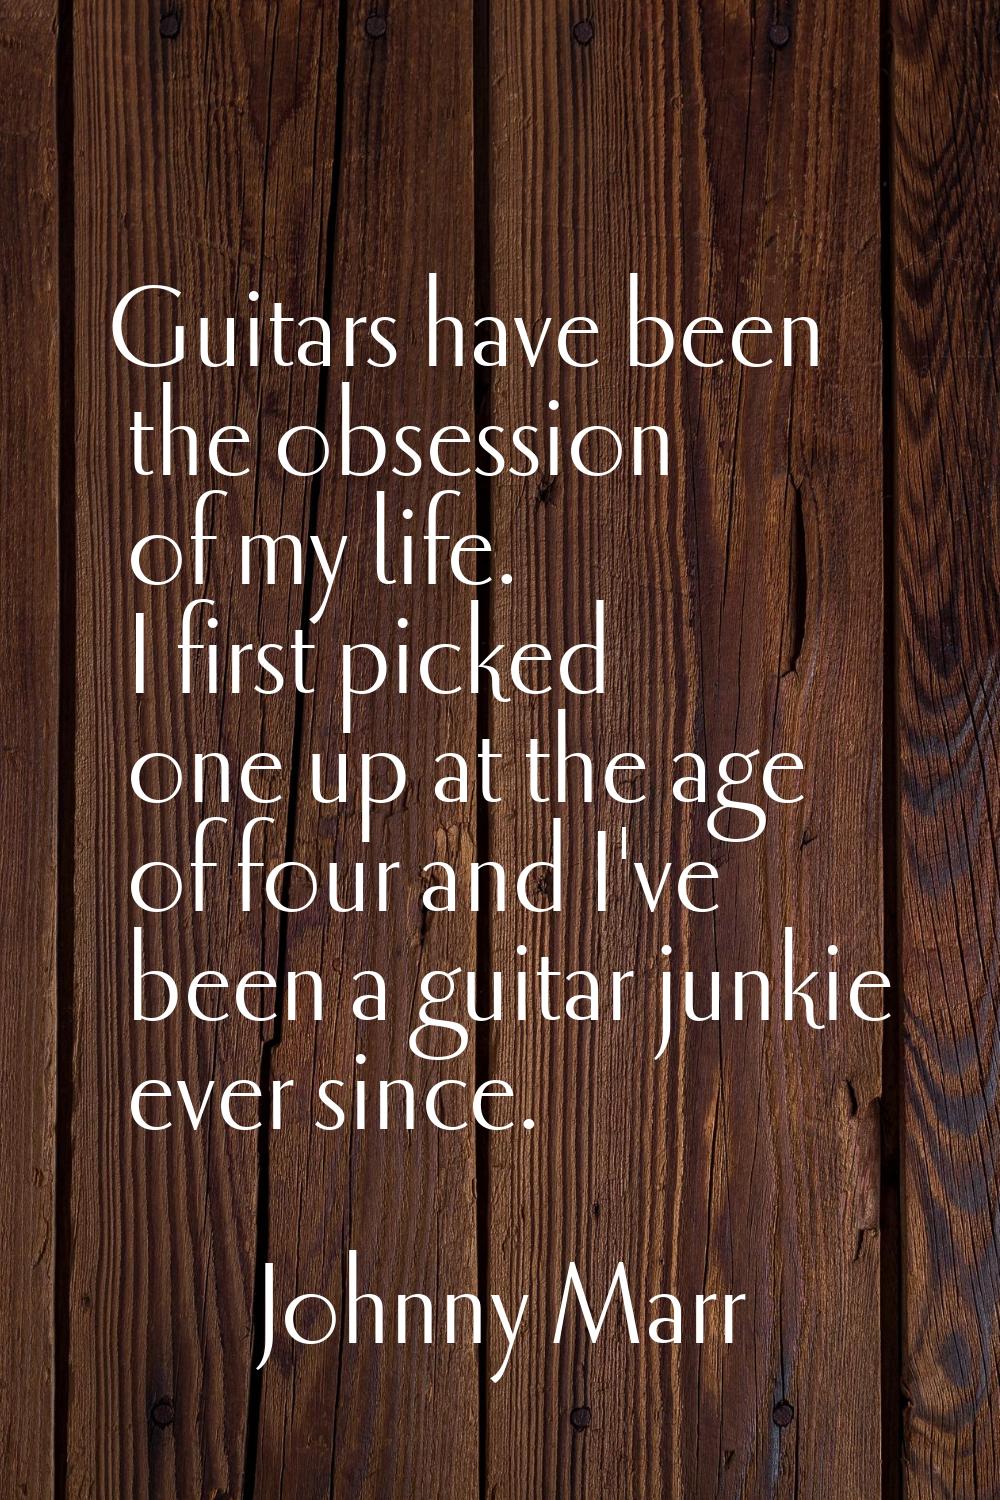 Guitars have been the obsession of my life. I first picked one up at the age of four and I've been 